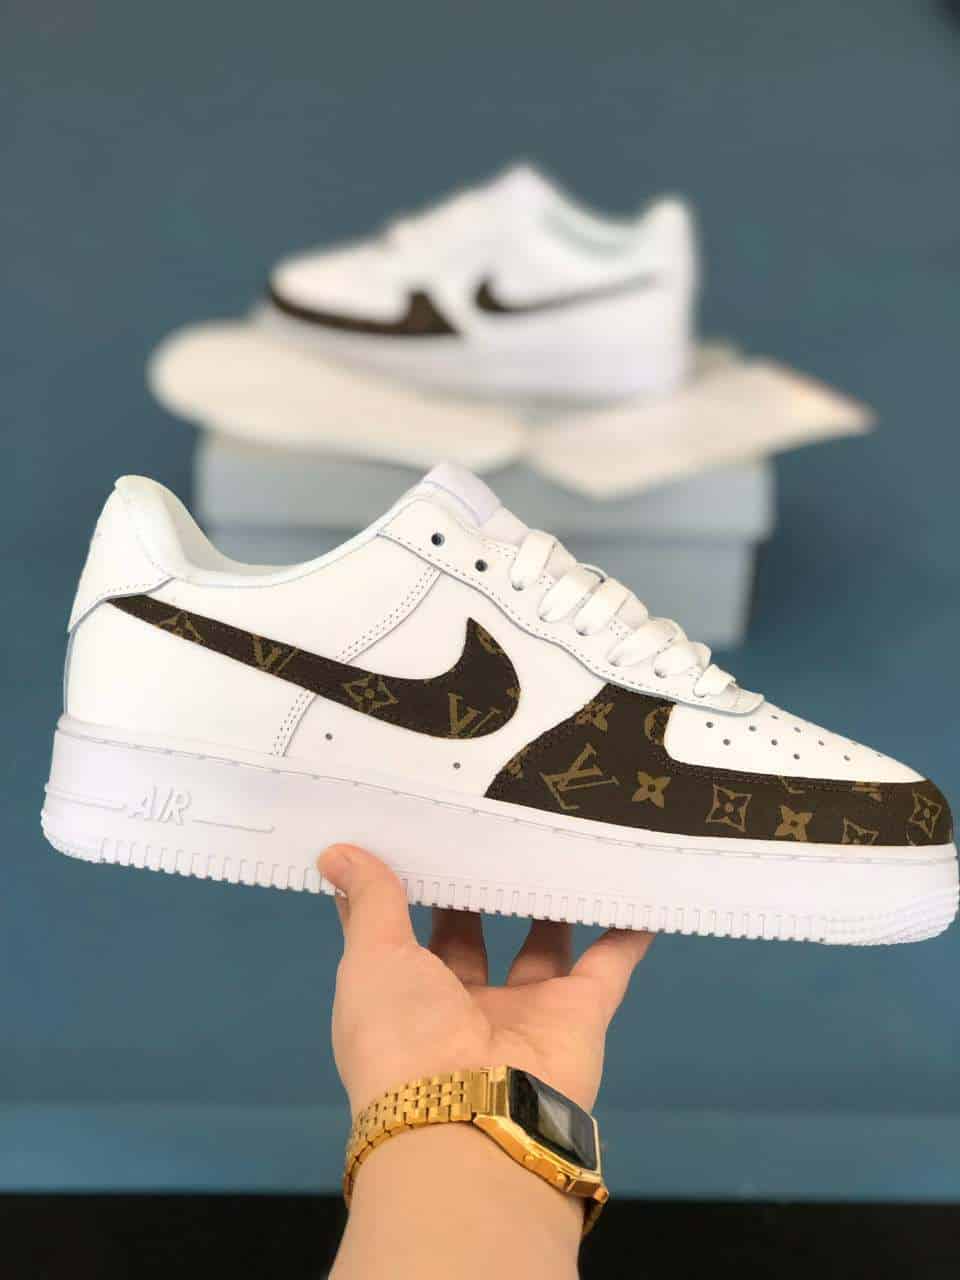 Louis Vuitton x Nike Air Force 1 All About The Coveted General Release  Pairs  Sneakers Sports Memorabilia  Modern Collectibles  Sothebys